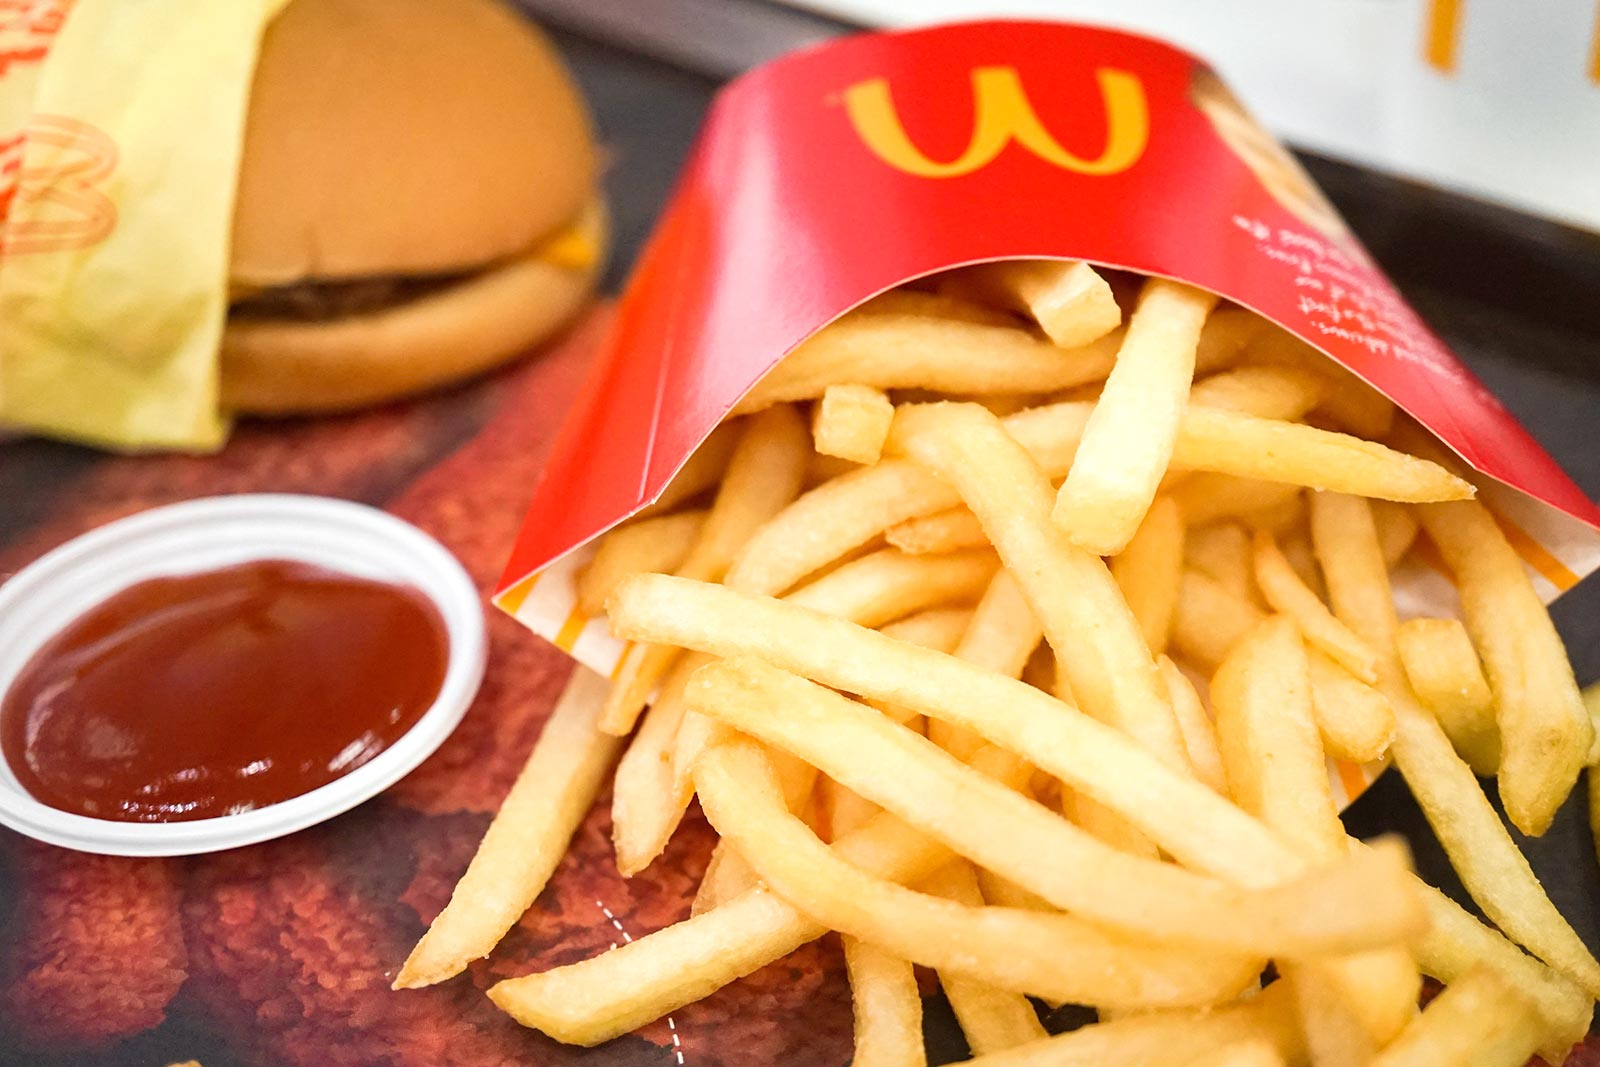 🍟 Rate These French Fries on a Scale of 1 to 5 and We’ll Know Exactly How Old You Are Ketchup on the side of McDonald's French Fries